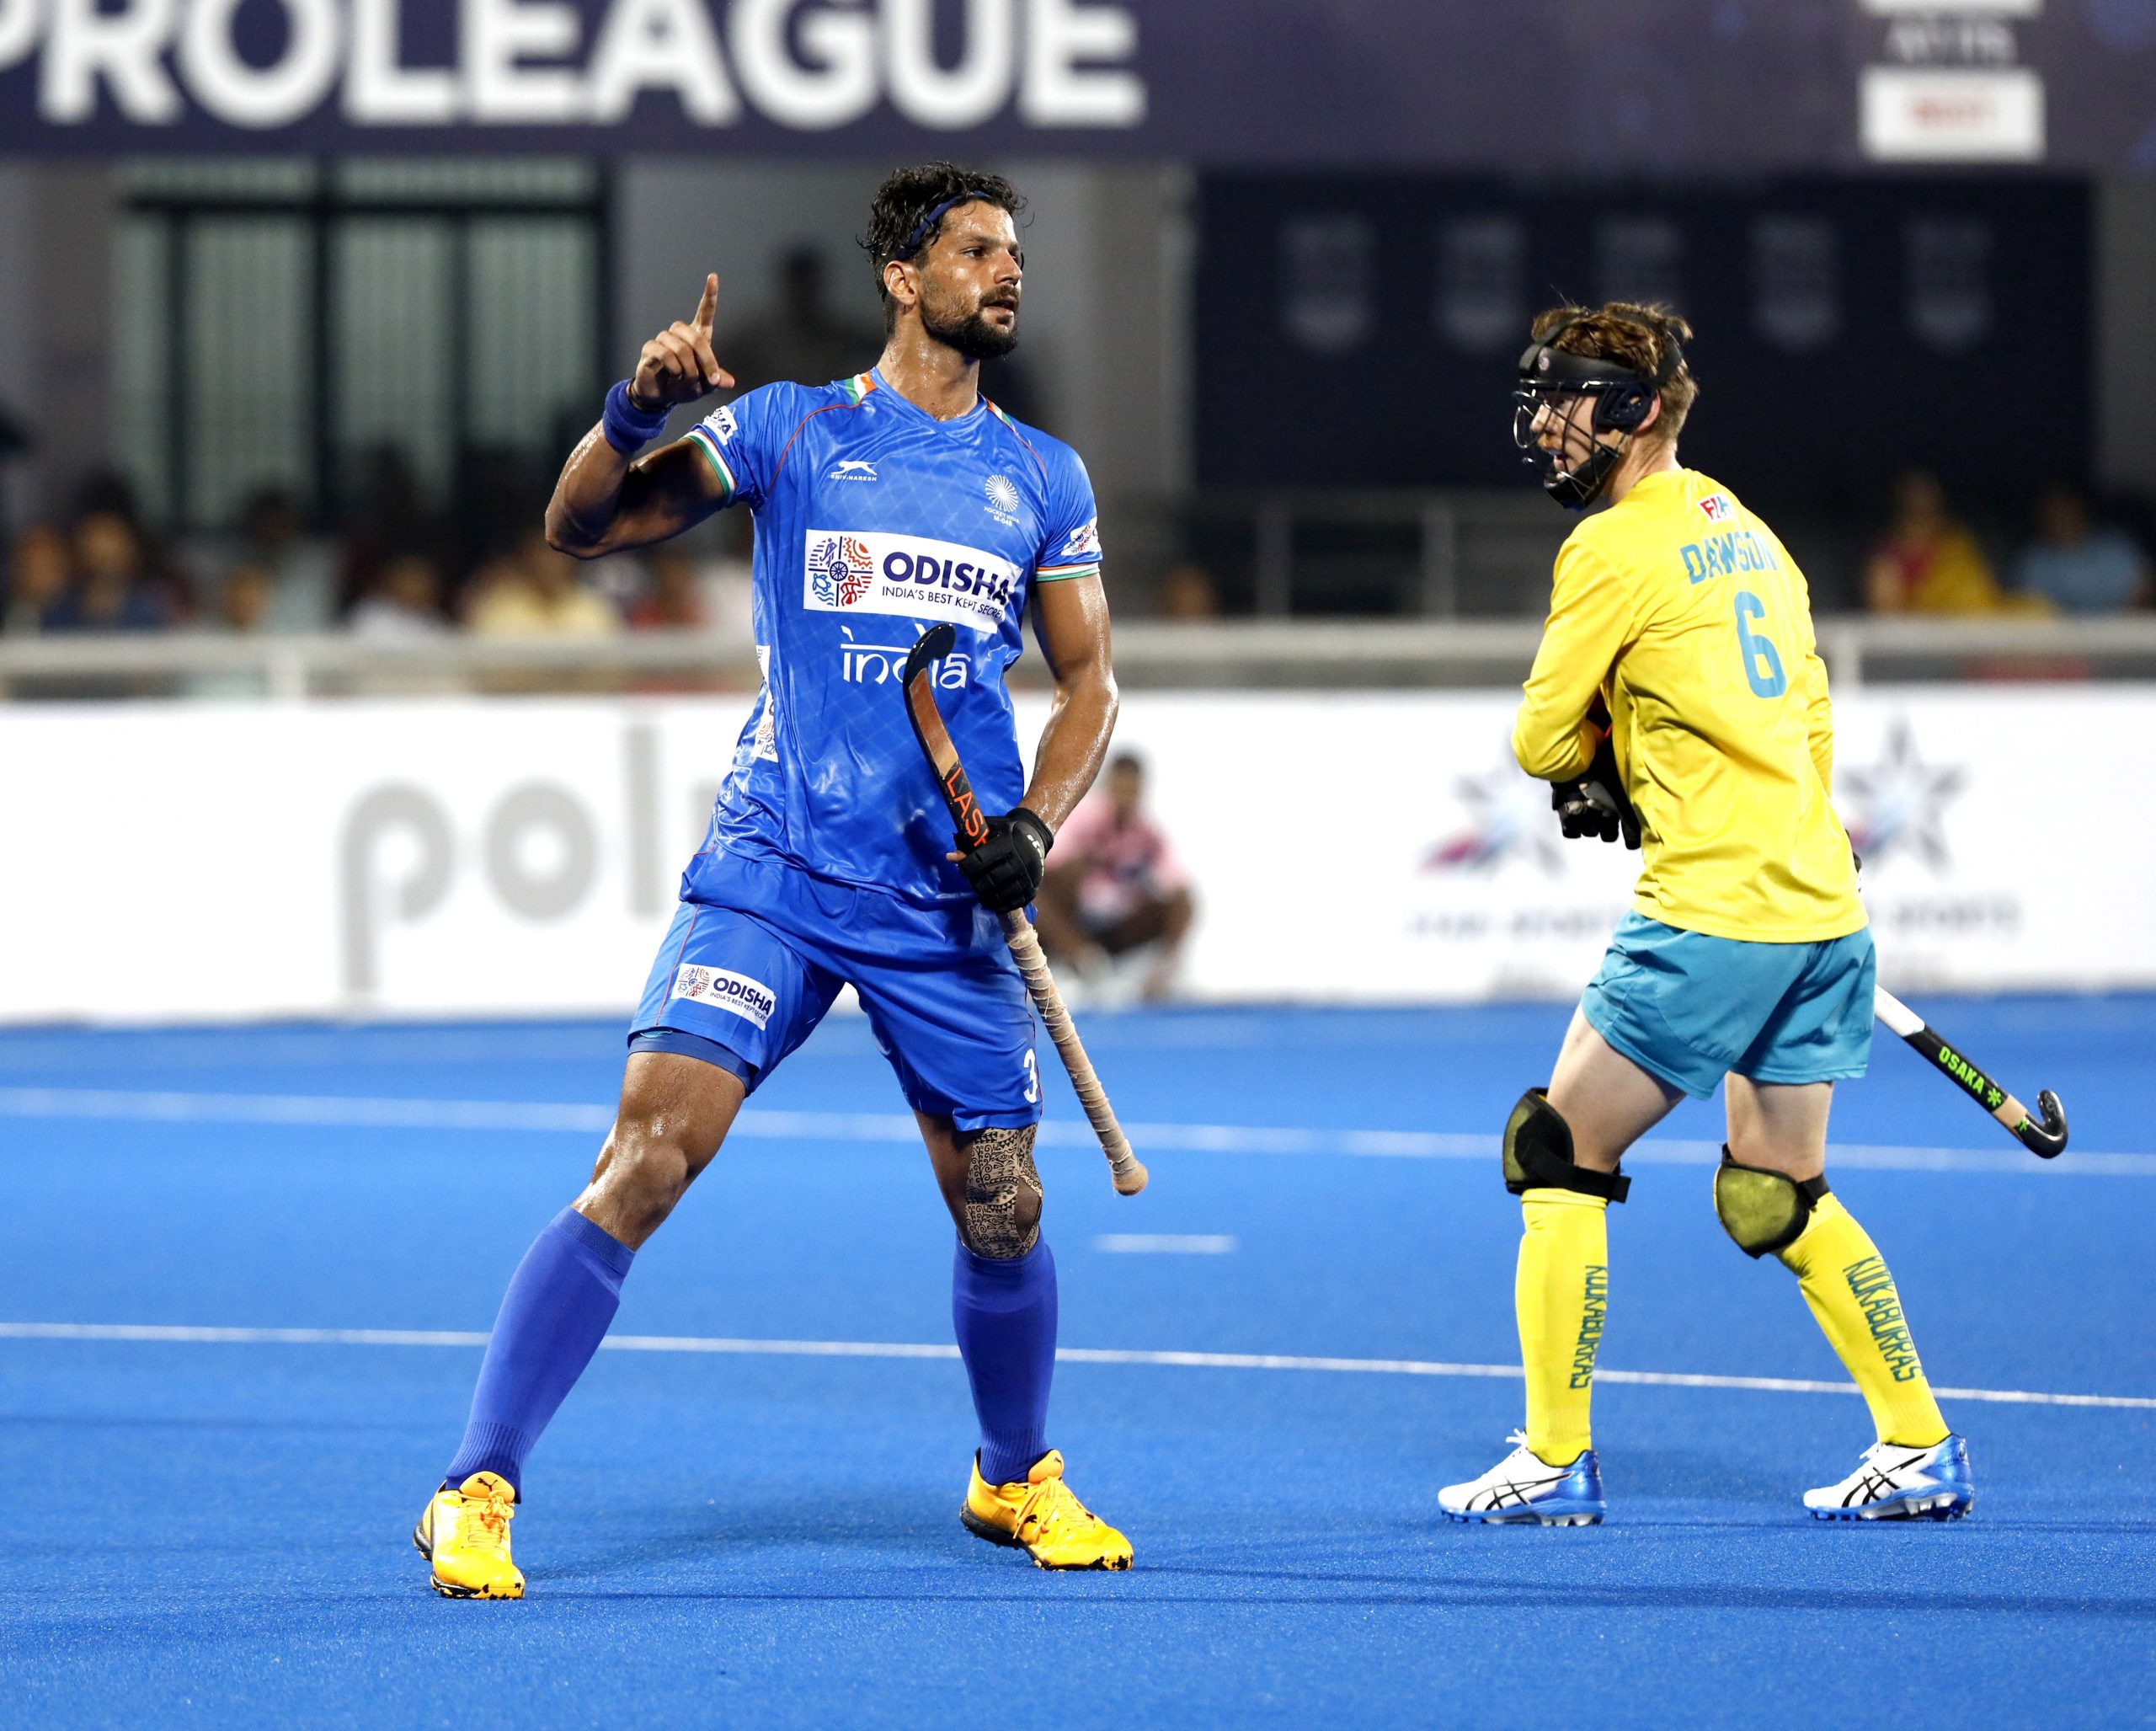 Rupinder Pal Singh after scoring his goal against Autralia at the FIH Pro Hockey League 2020 (Source: Hockey India)